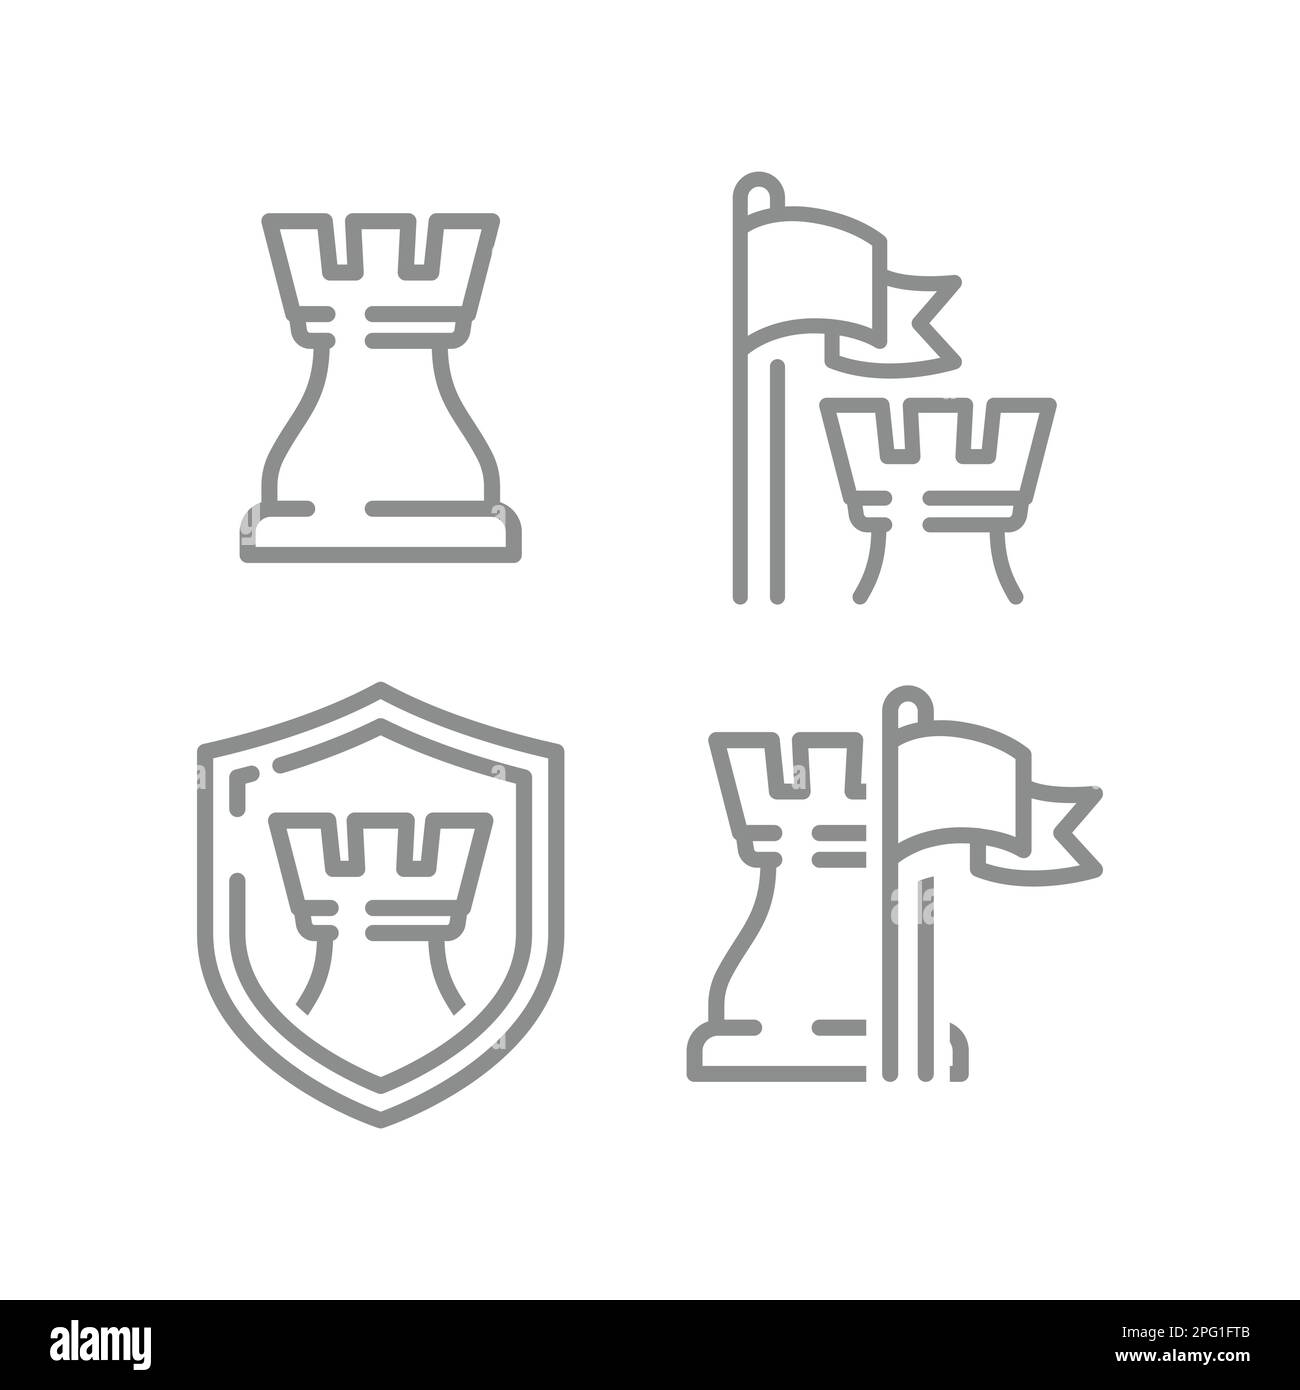 Chess king piece, flag and shield icon. Guarded, protected, secure concept line vector icons. Stock Vector